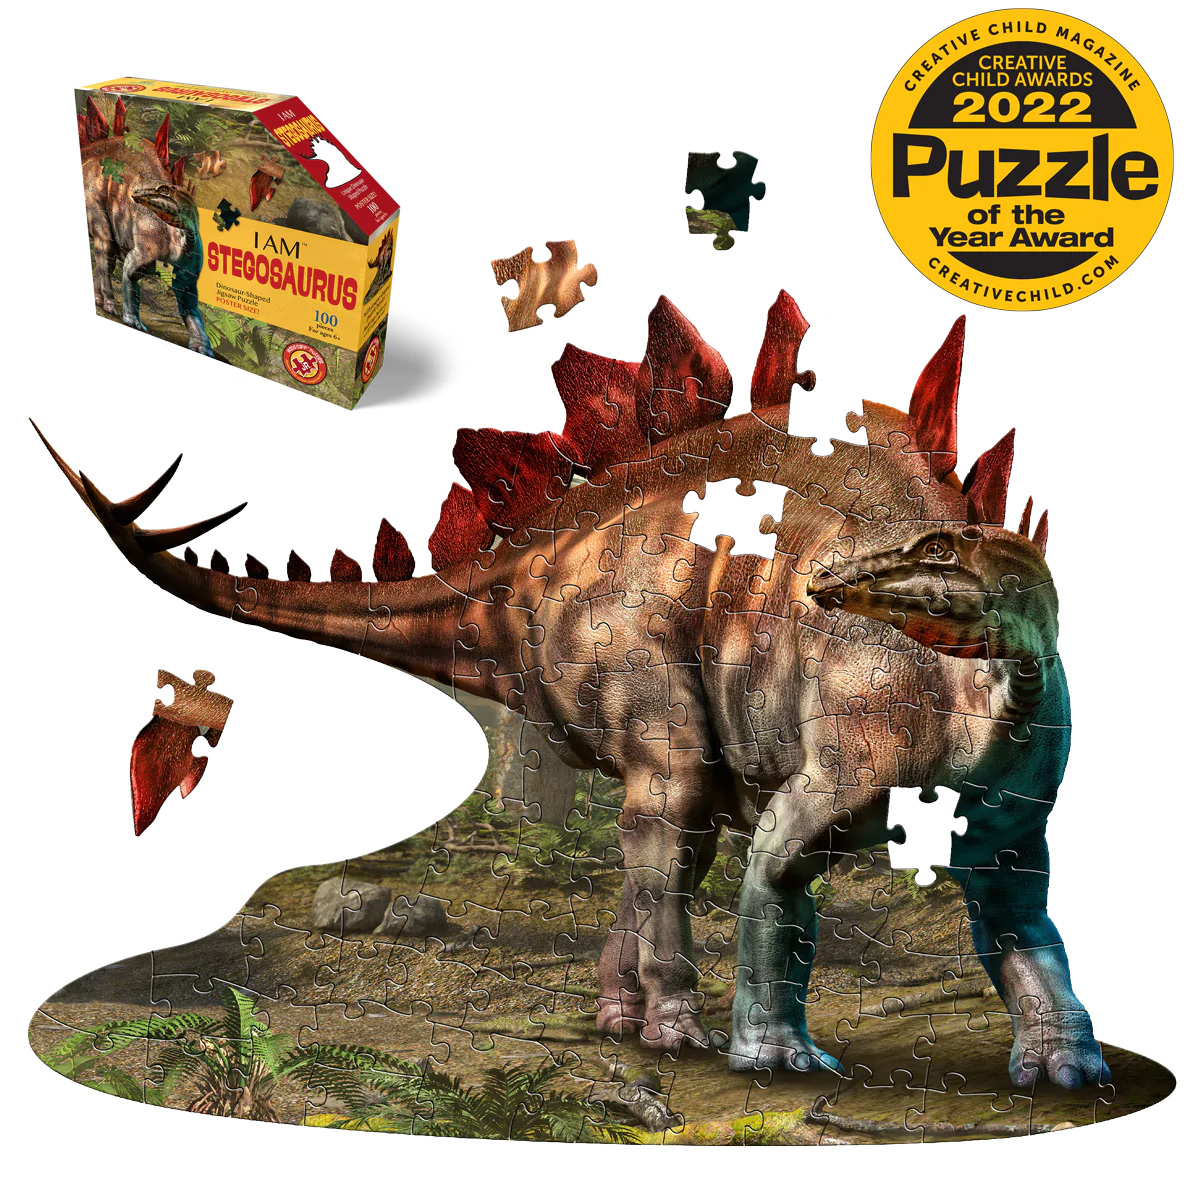 I am Stegosaurus - Scratch and Dent Dinosaurs Shaped Puzzle